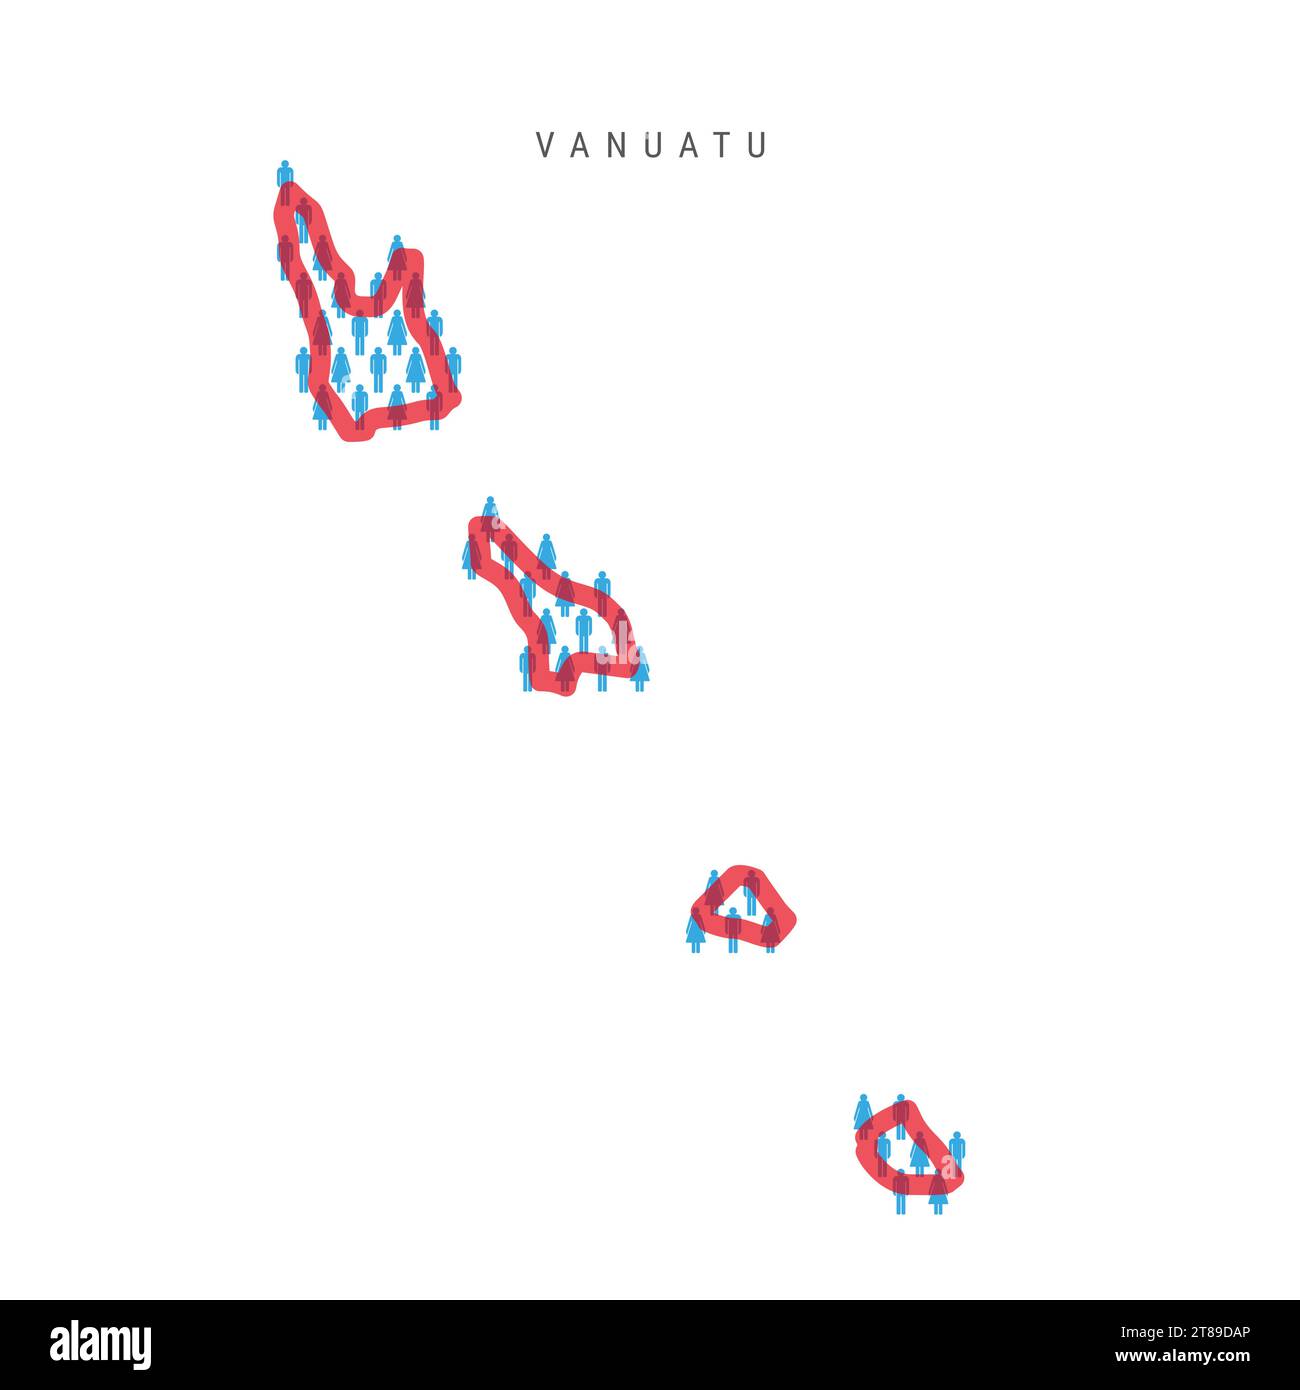 Vanuatu population map. Stick figures Vanuatuan people map with bold red translucent country border. Pattern of men and women icons. Isolated vector i Stock Vector